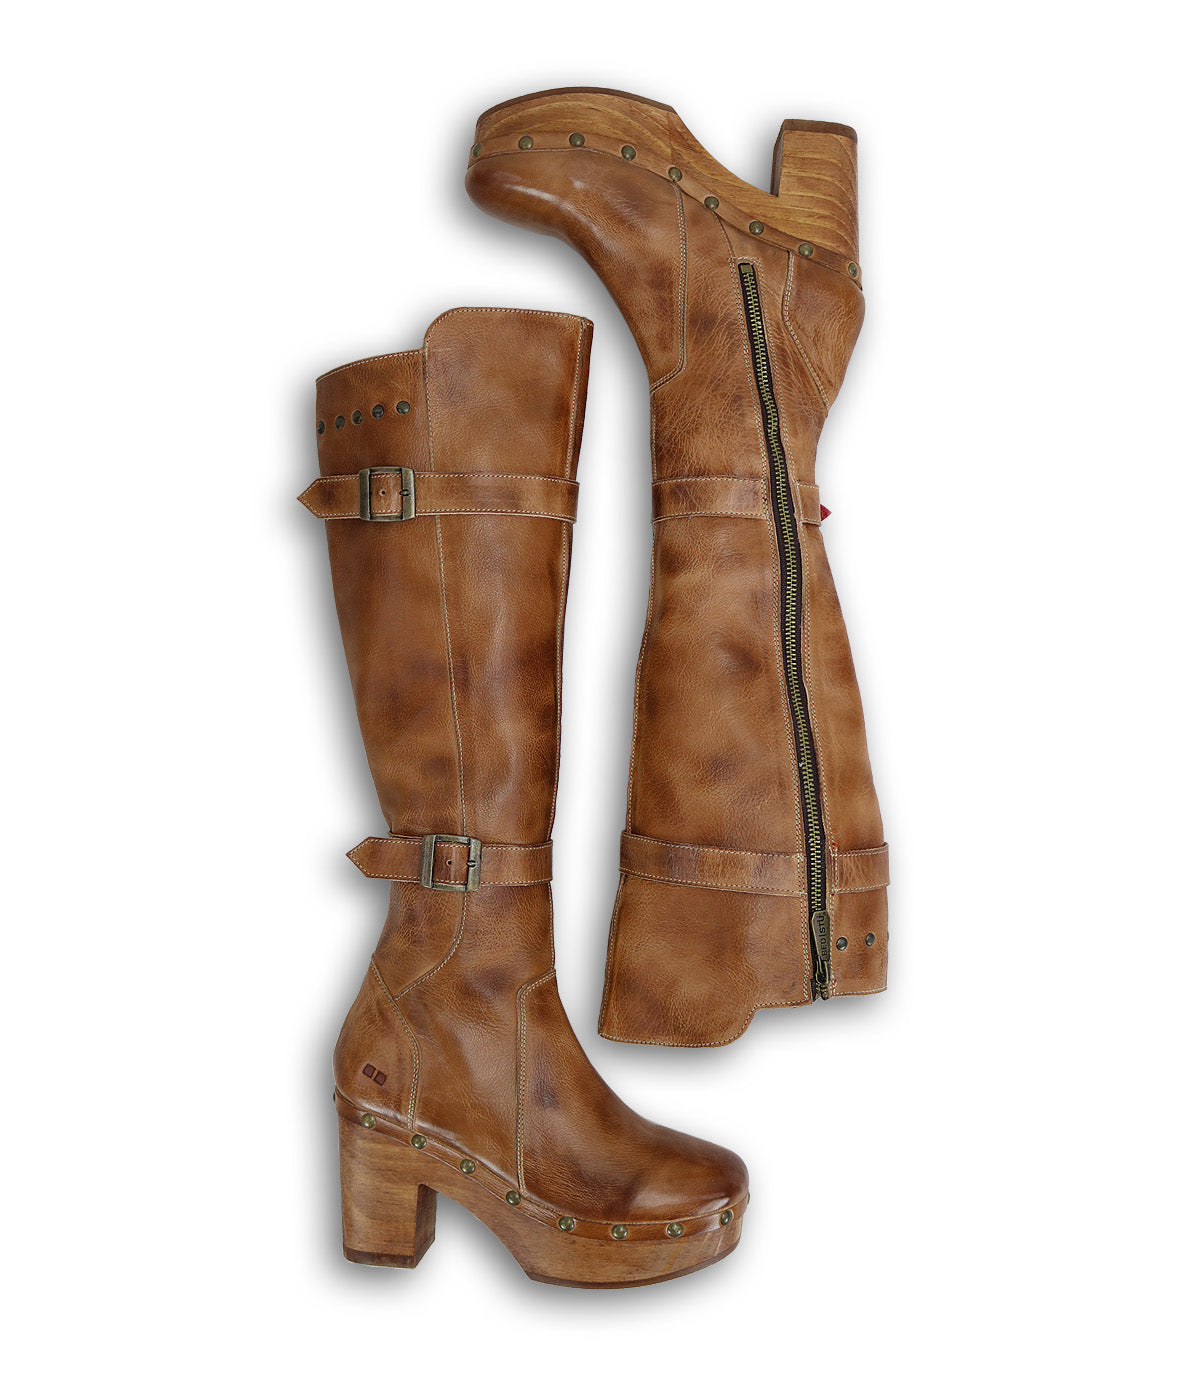 A pair of Ceretti brown boots with buckles on the side by Bed Stu.